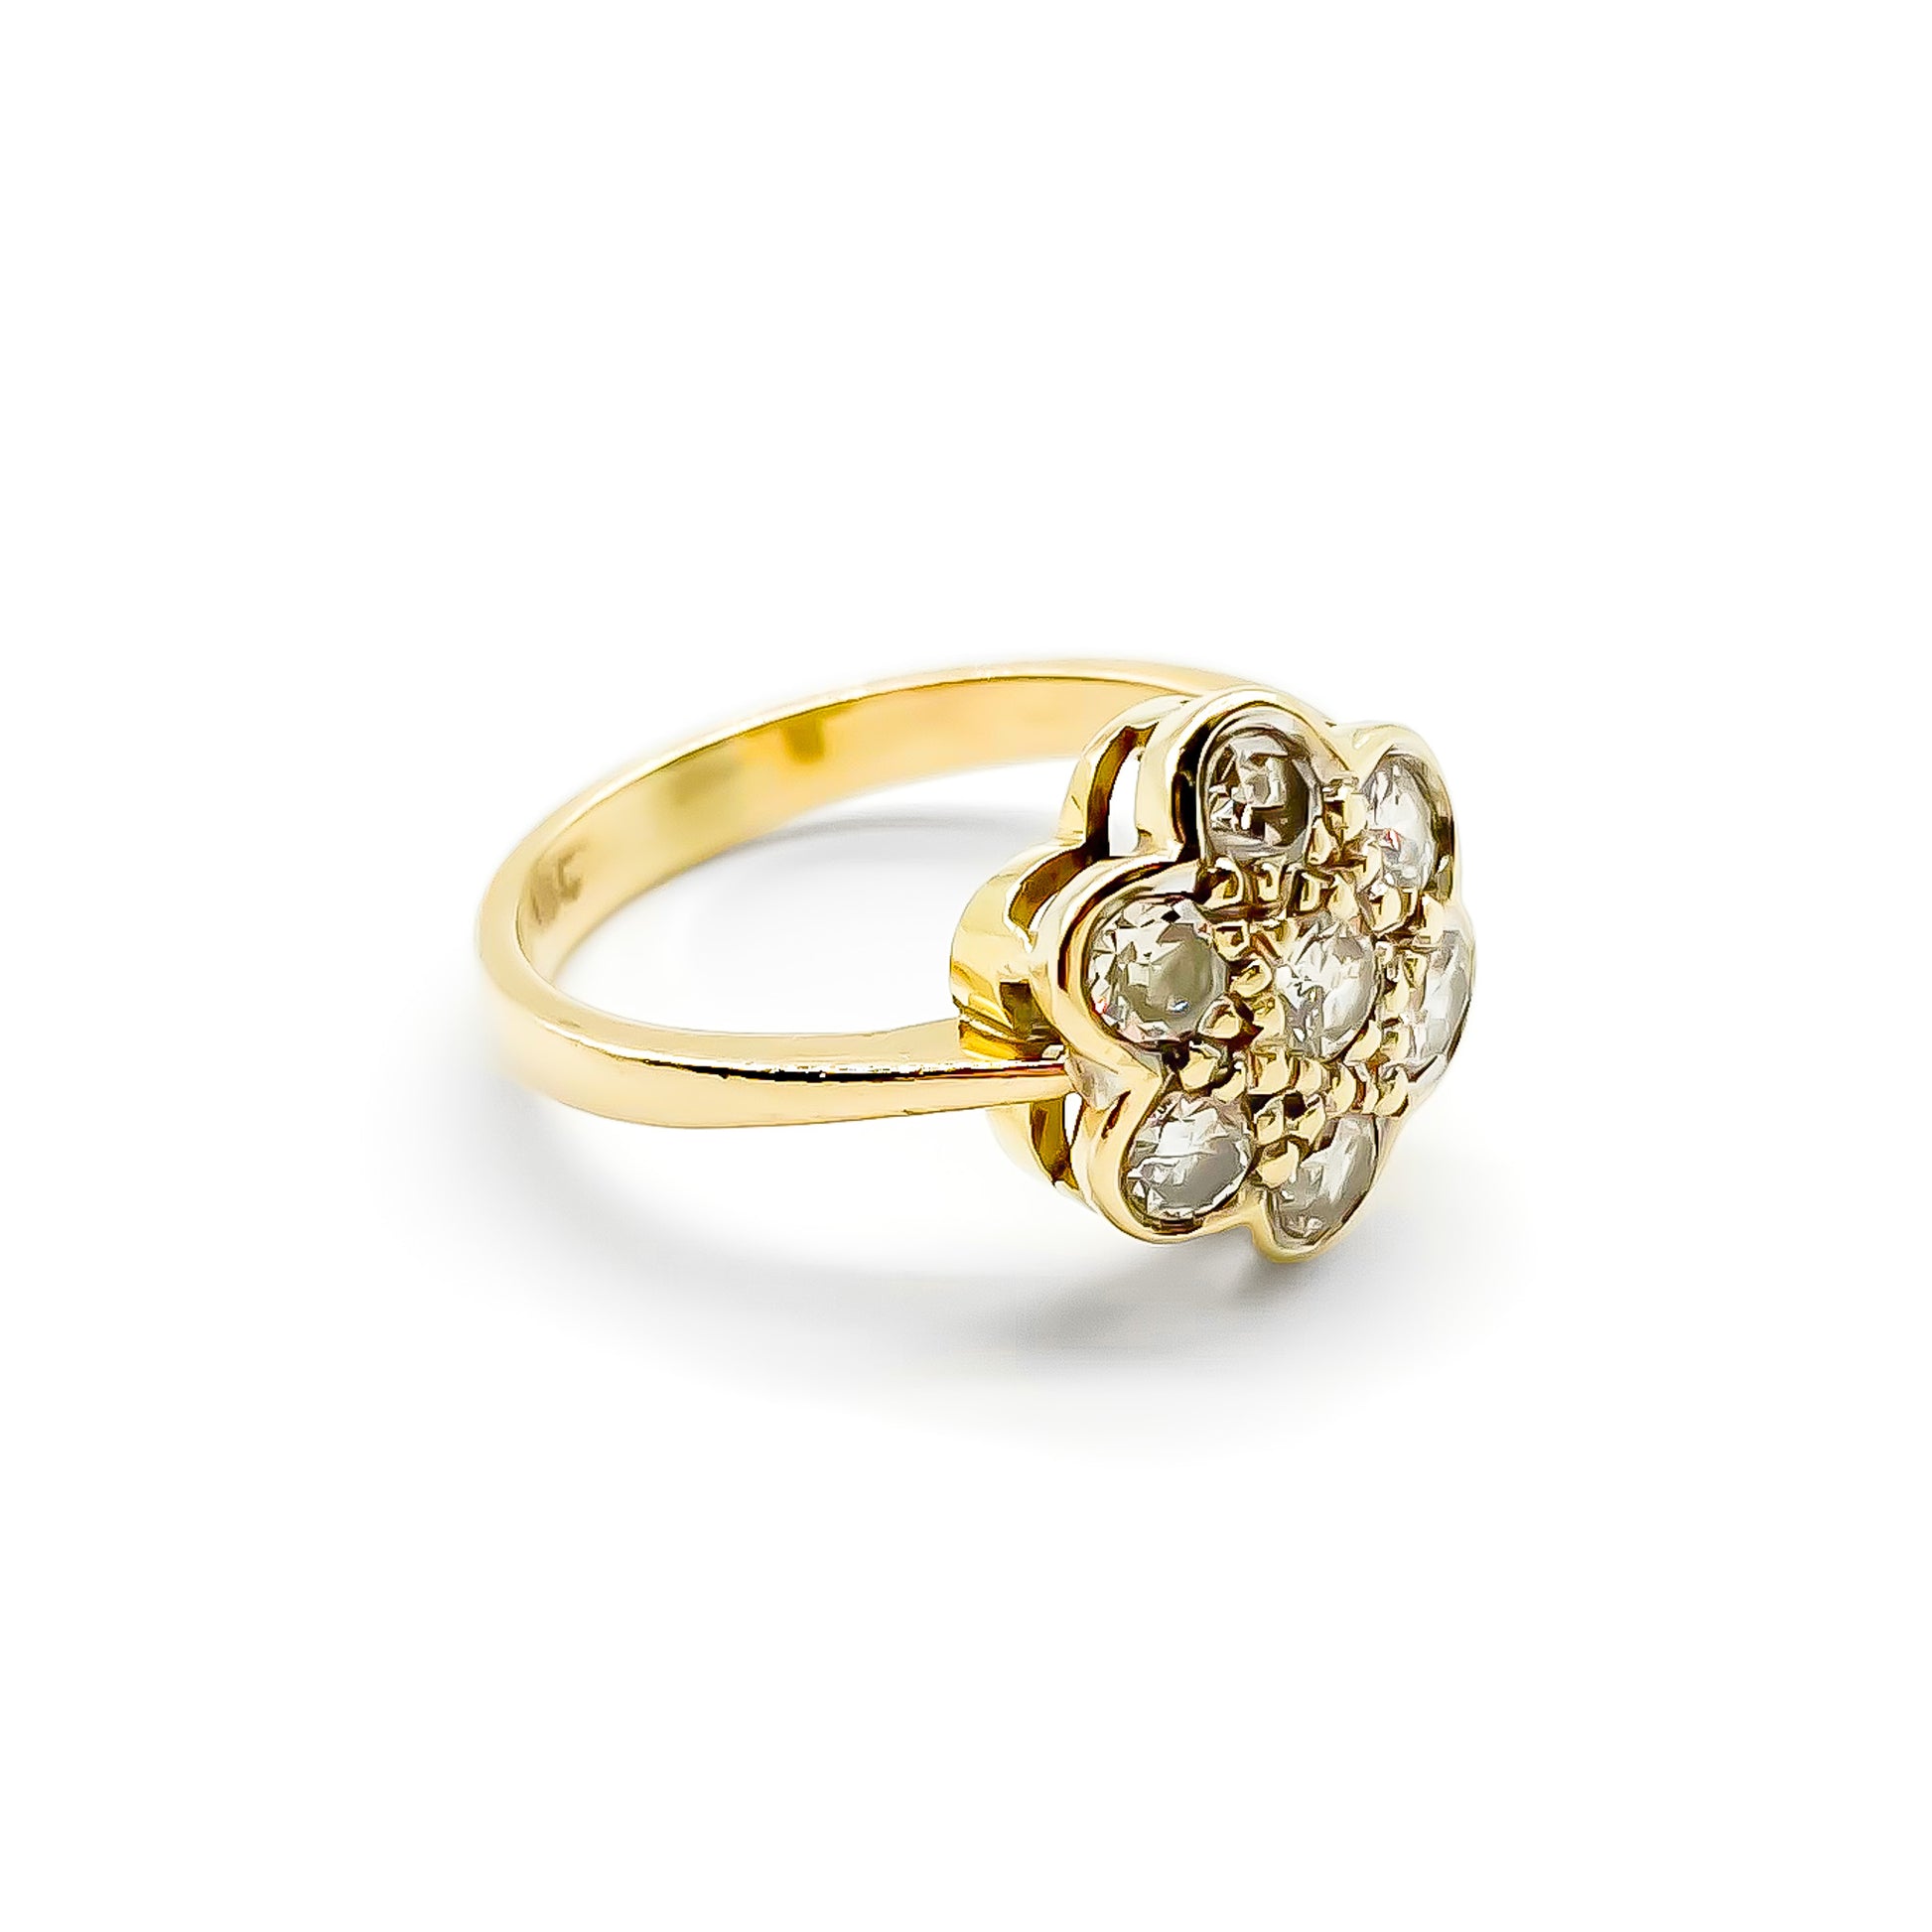 Lovely 18ct gold ring set with seven old-cut diamonds in the shape of a flower.